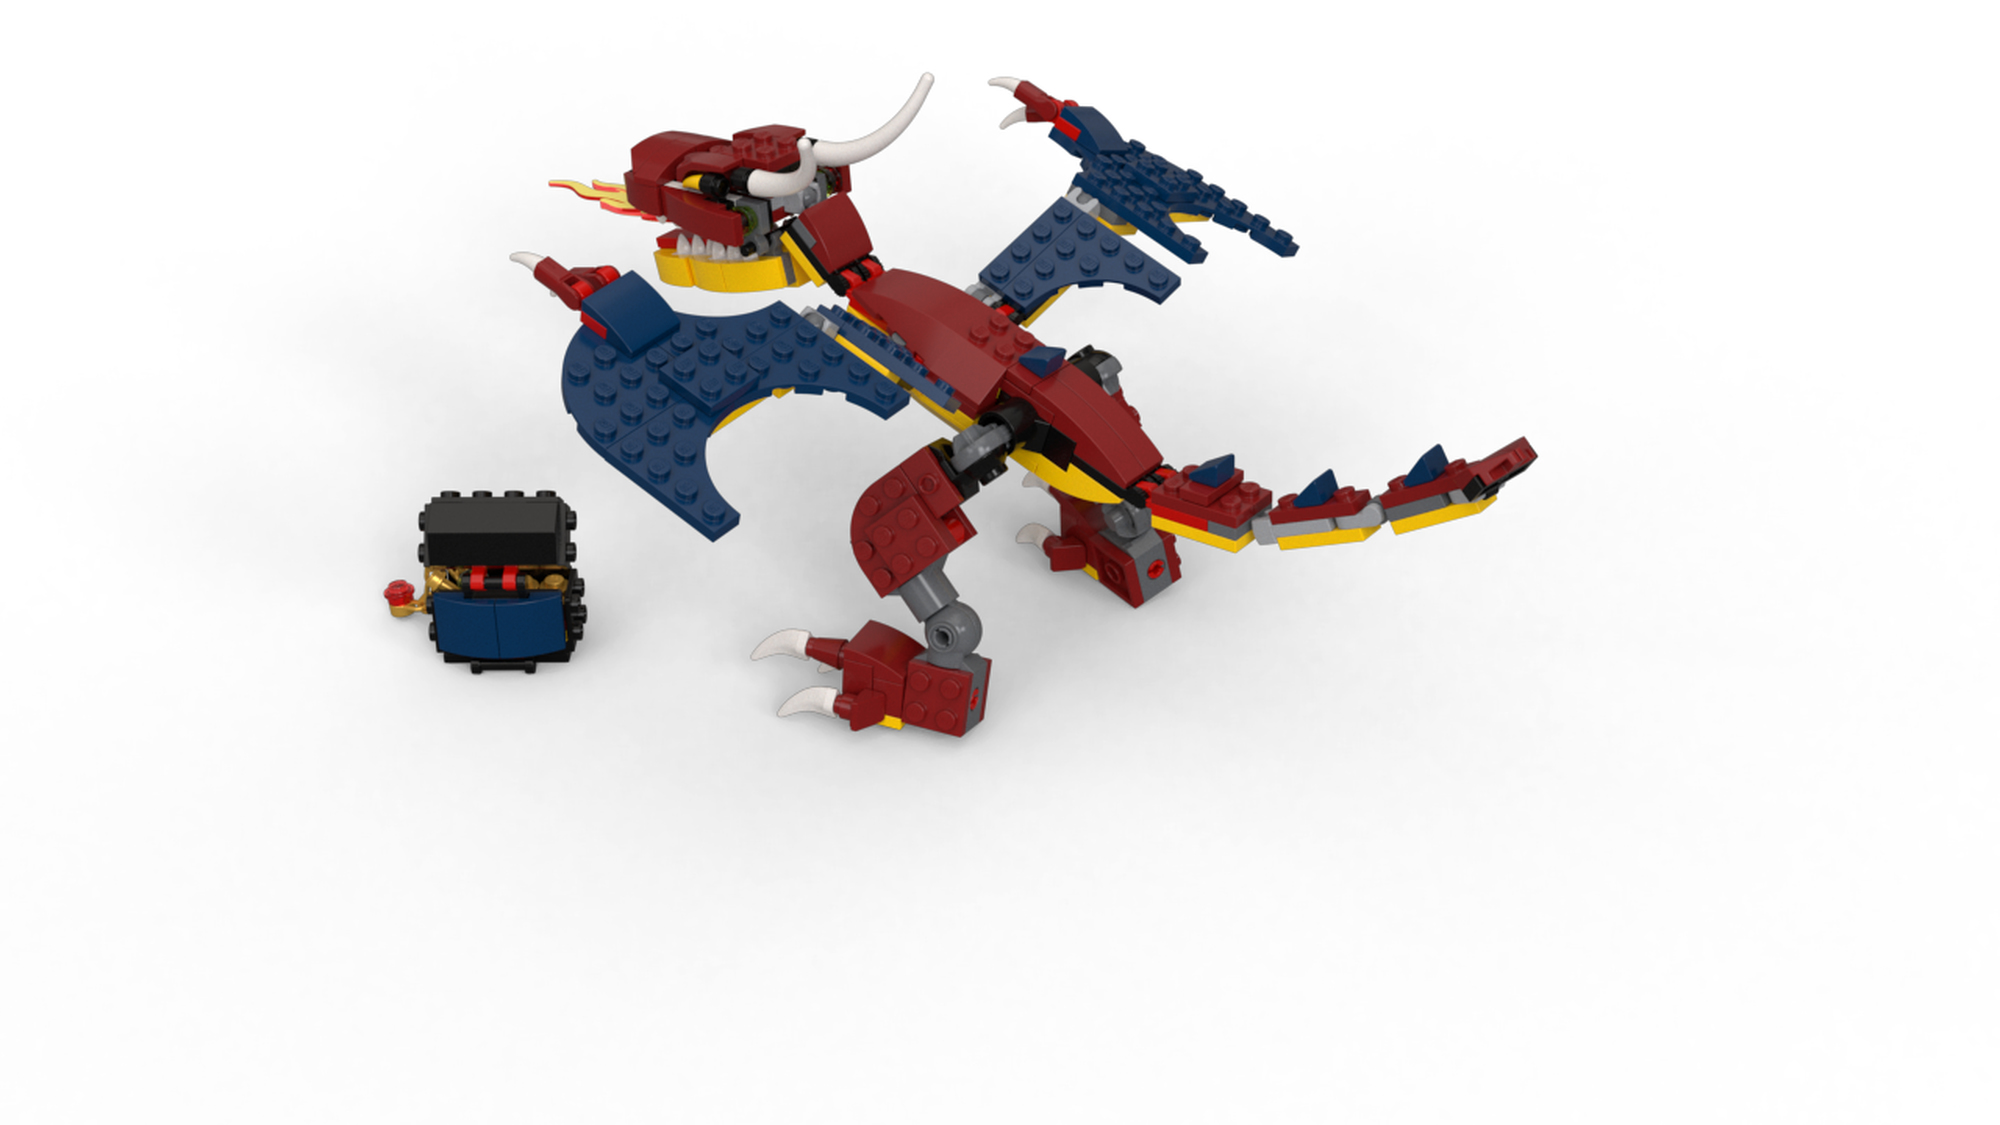  LEGO Creator 3in1 Fire Dragon 31102 Building Kit, Cool